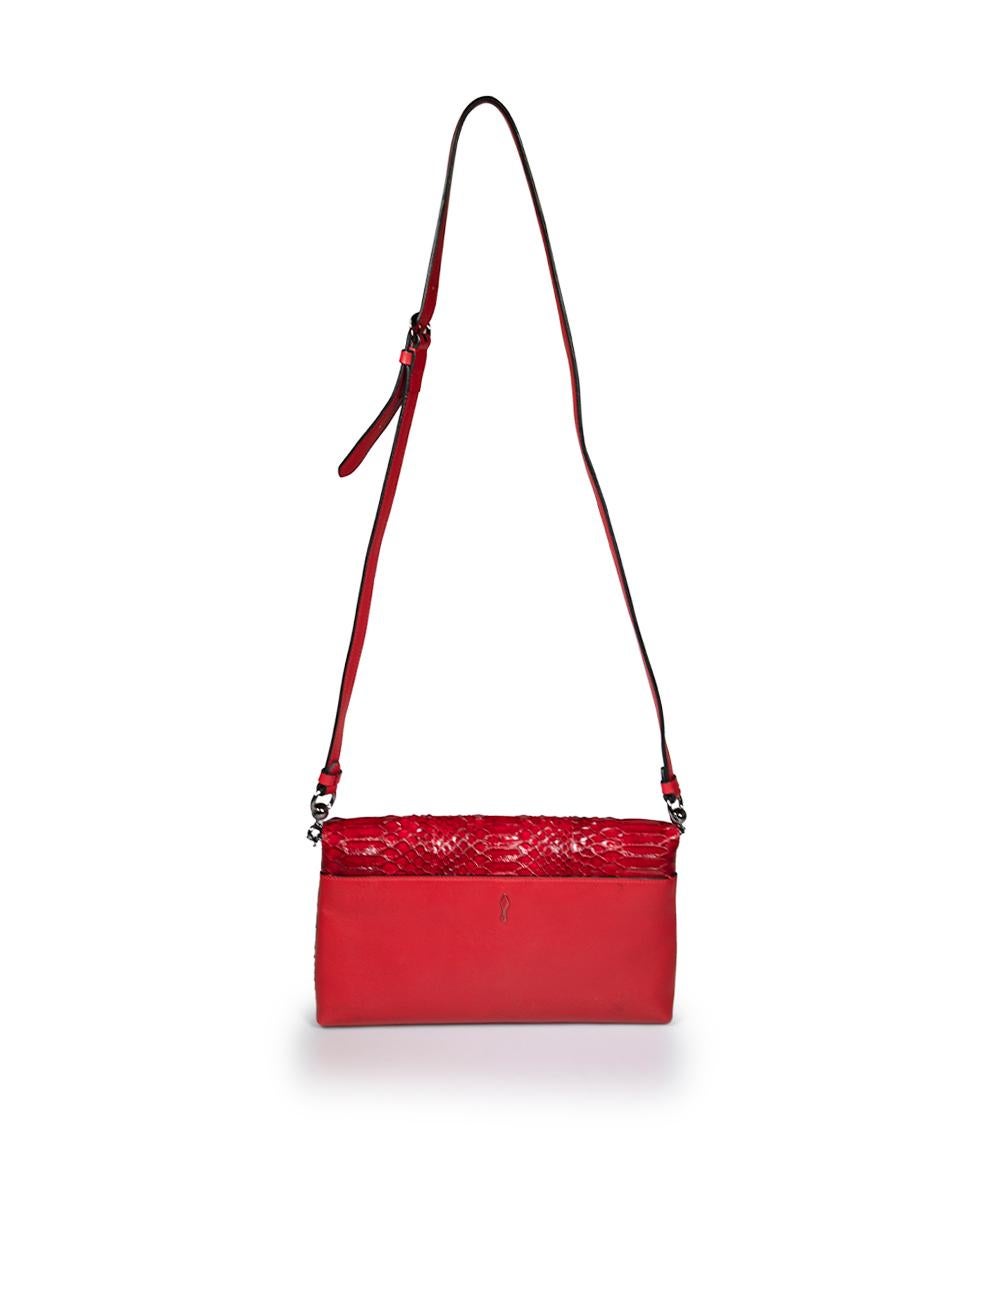 Christian Louboutin Red Python Rougissime Clutch Bag In Good Condition For Sale In London, GB